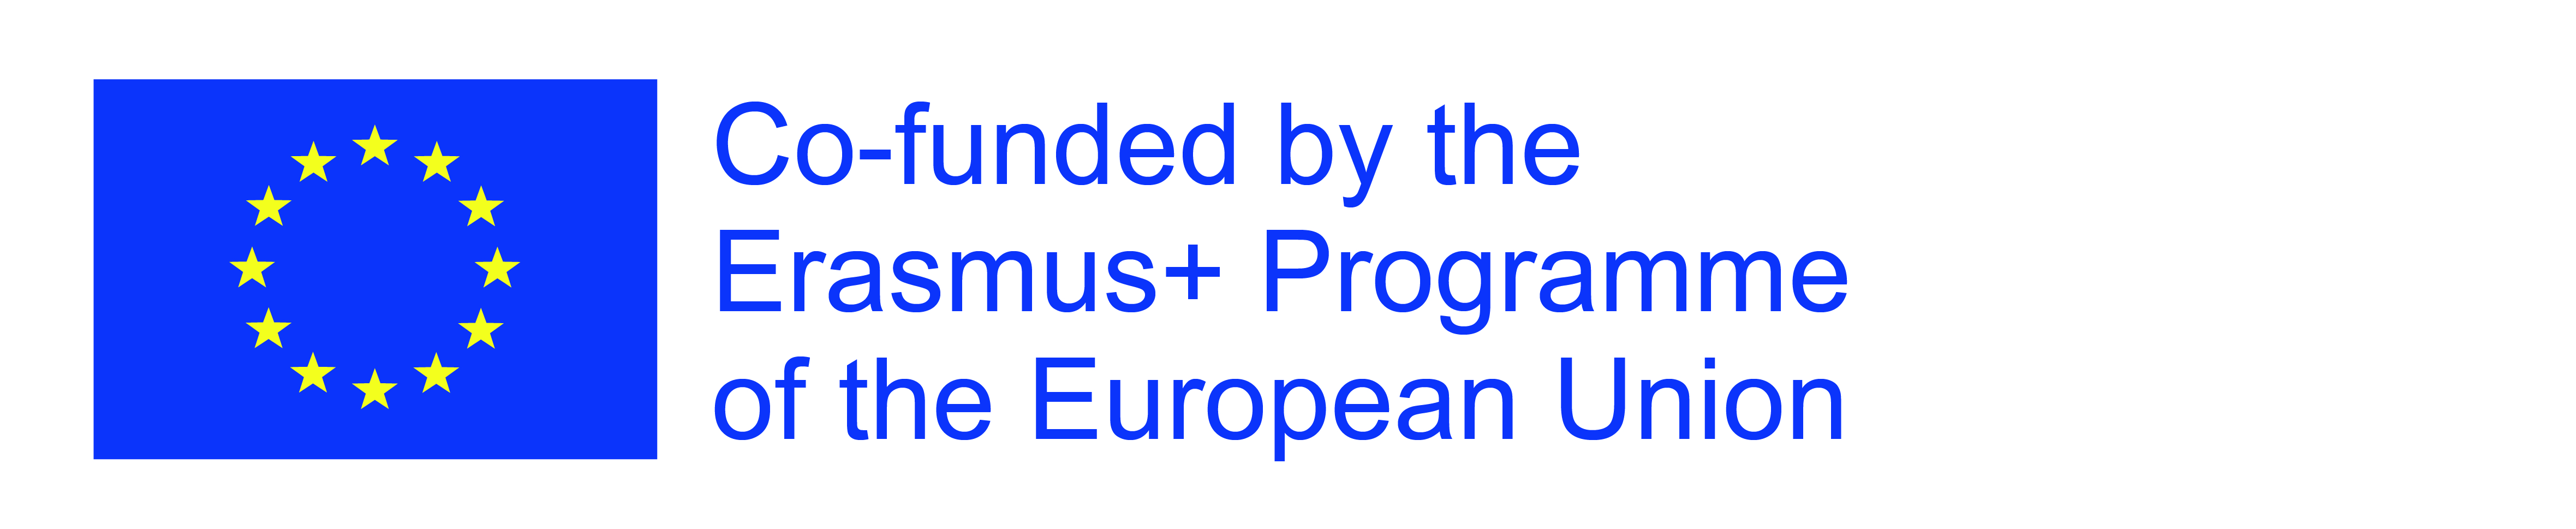 Eurasmus-Co-funded-logo-HIGH-QUALITY